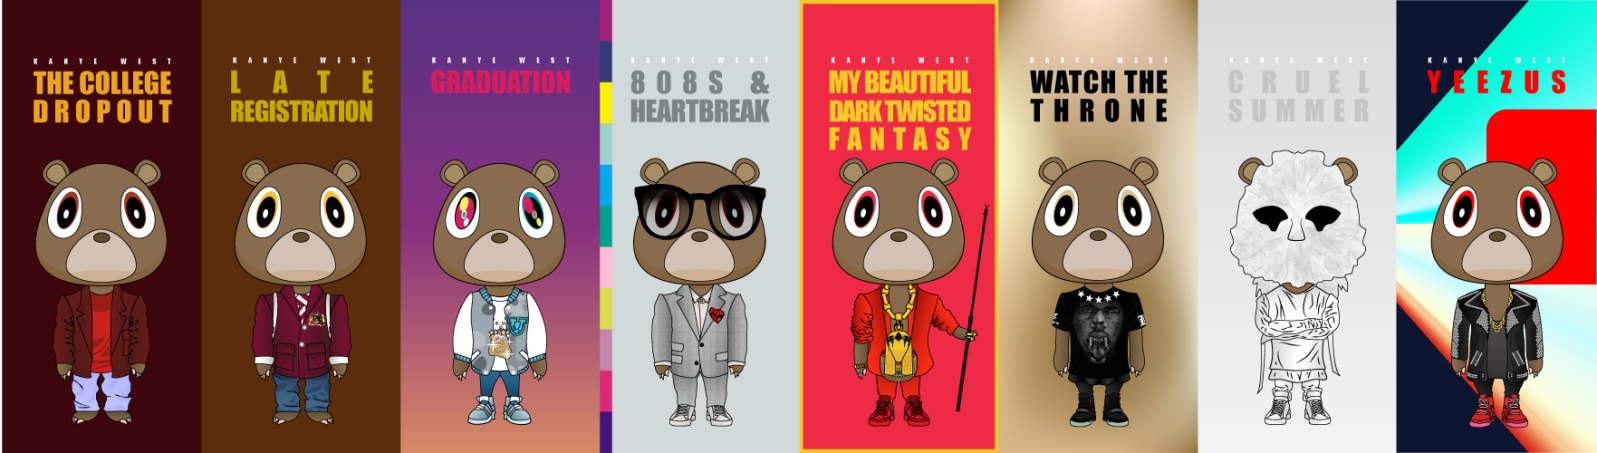 Kanye West Graduation Bear Wallpaper I Will Add More Non Dropout